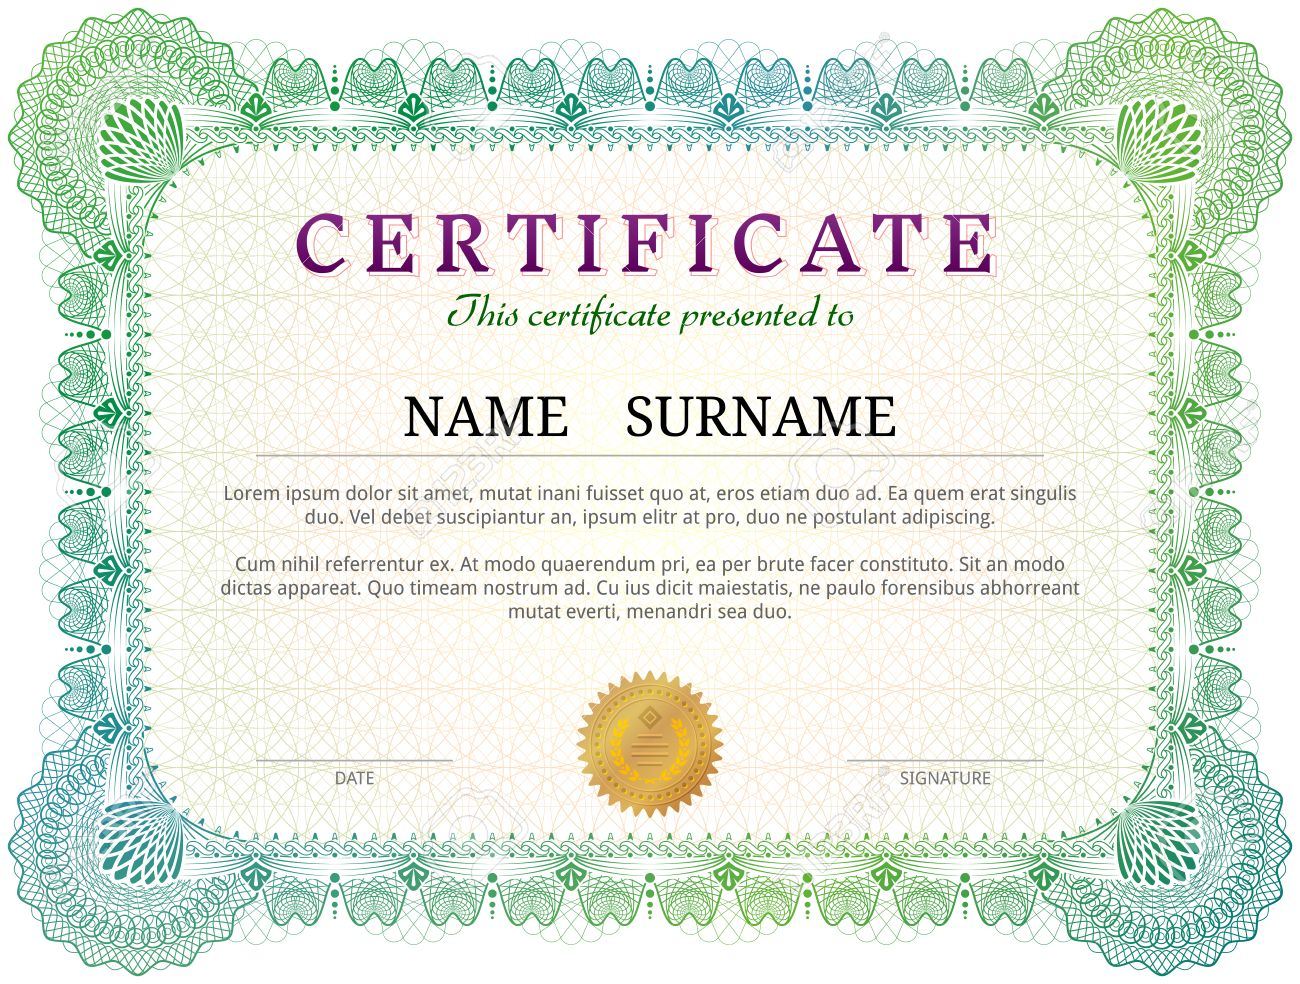 Certificate Template With Guilloche Elements. Green Diploma Border.. In Validation Certificate Template